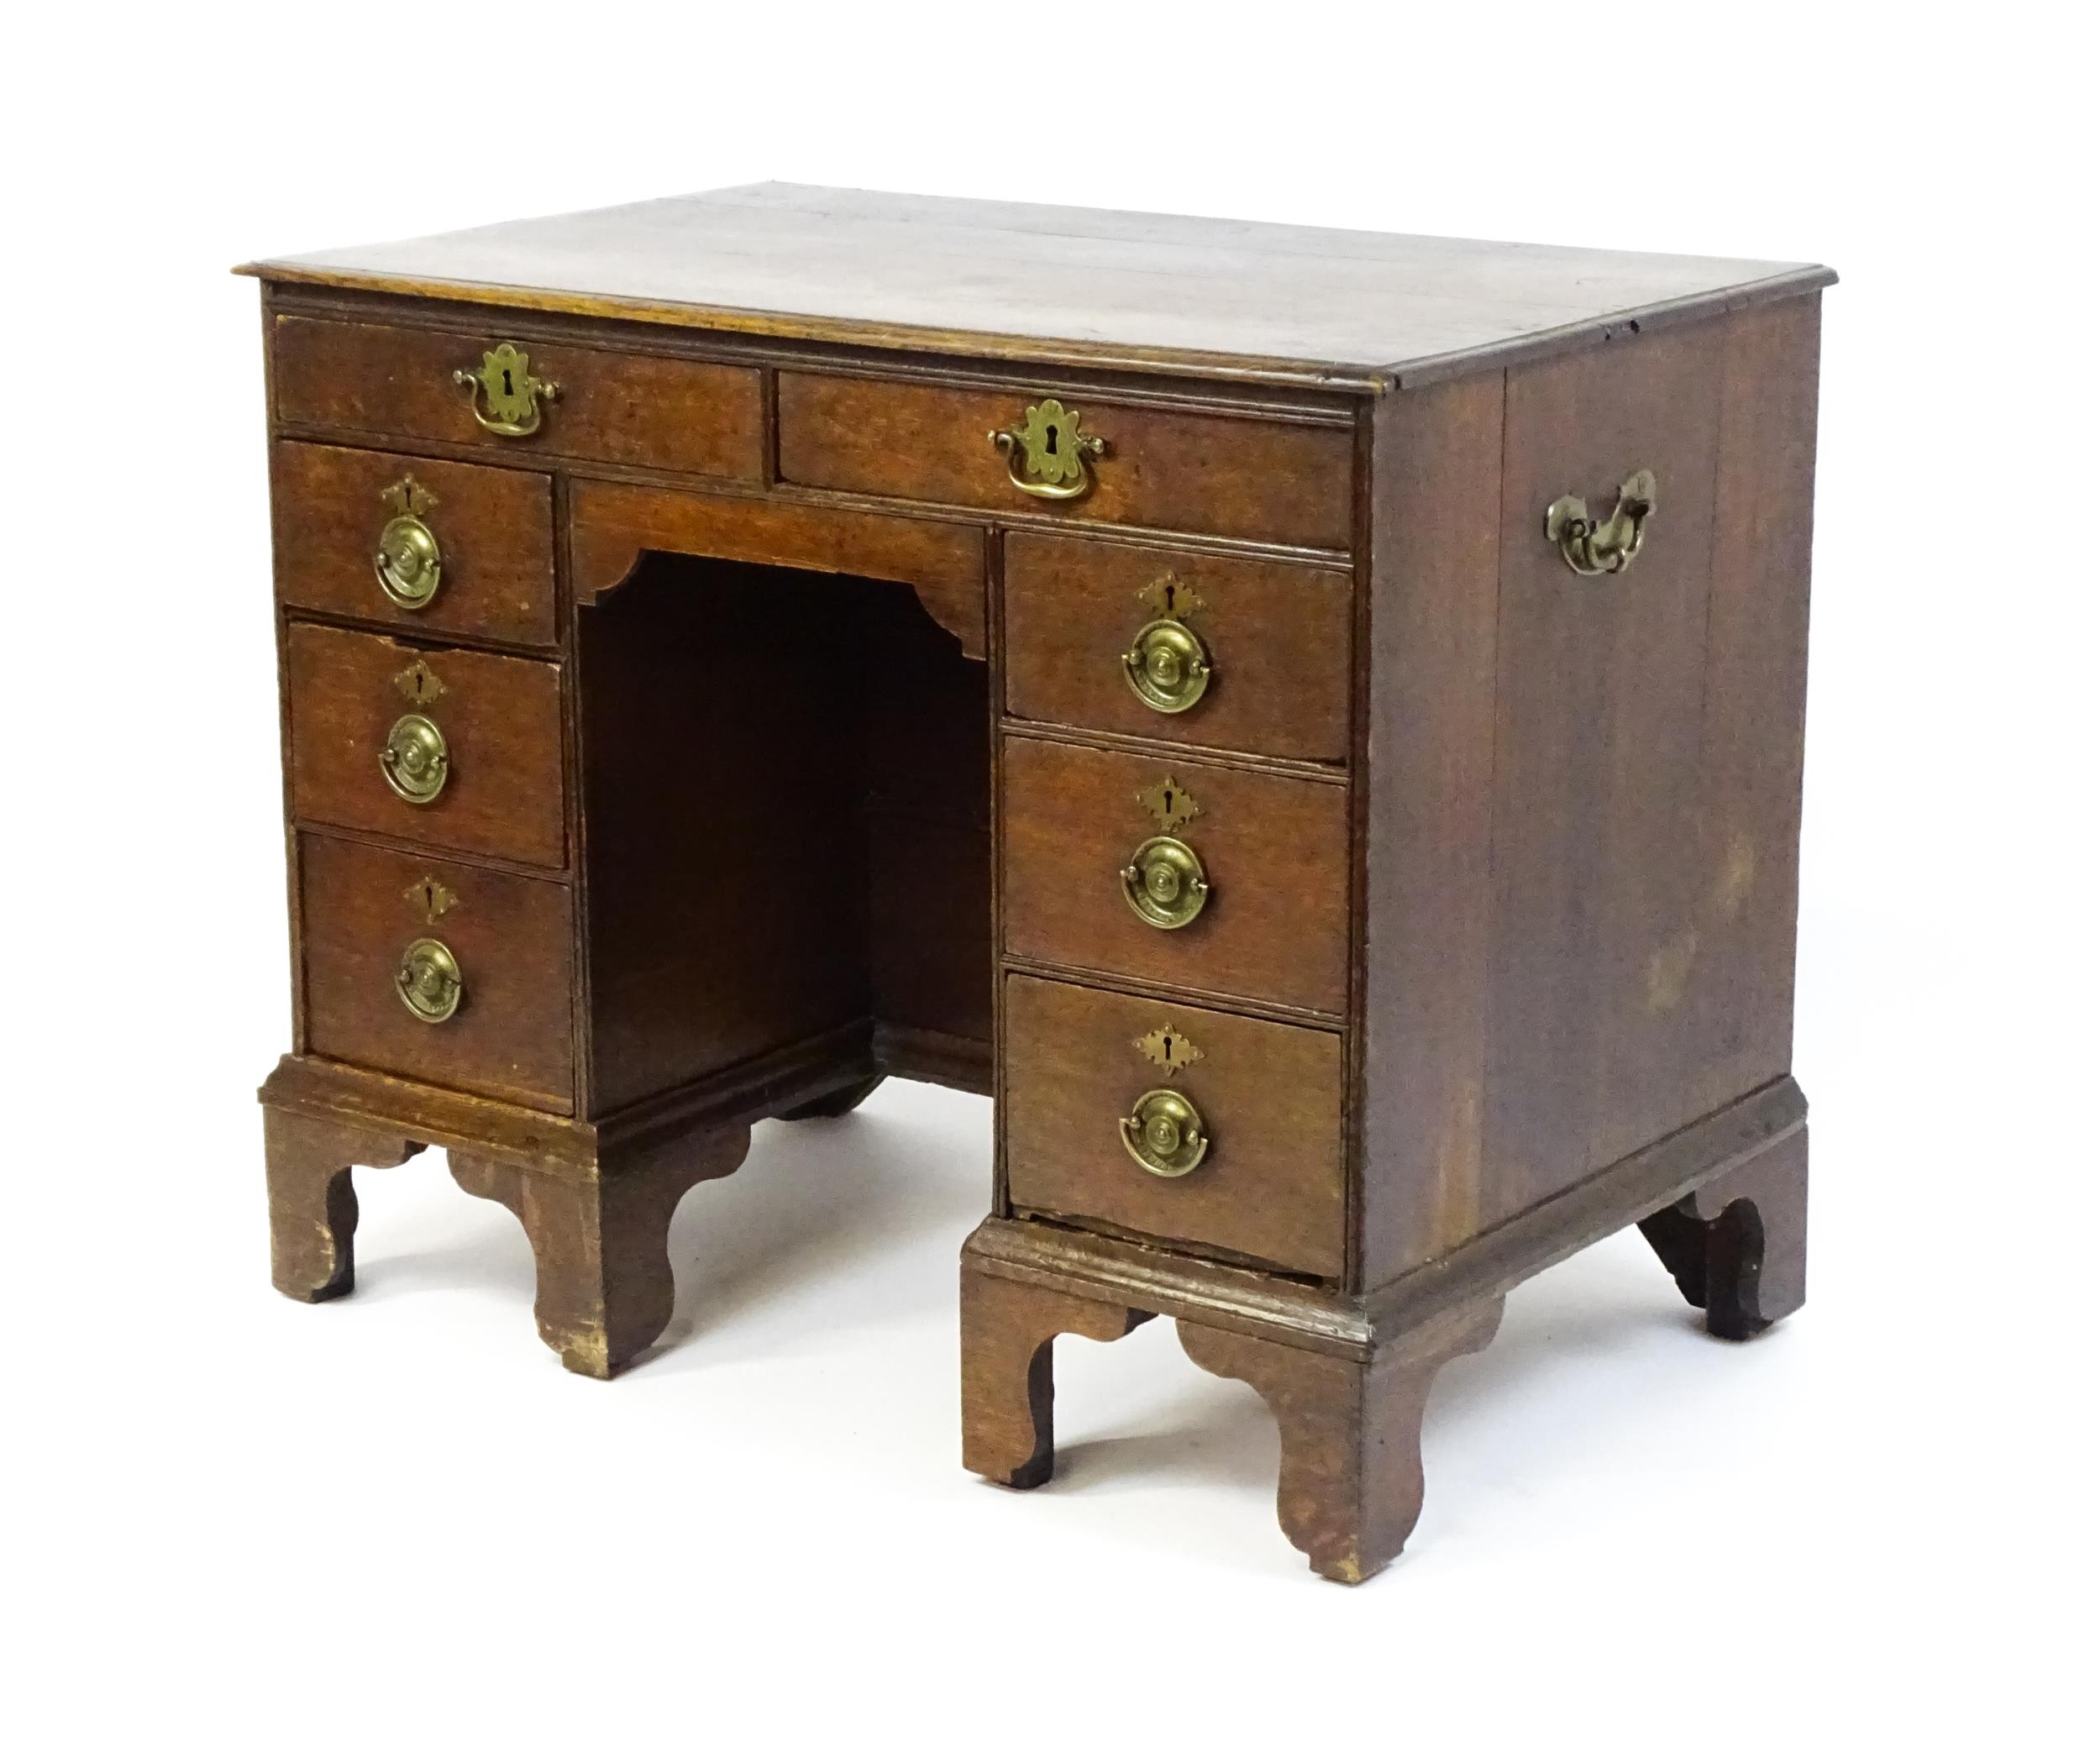 An early / mid 18thC oak kneehole desk with a moulded top above two short drawers and two banks of - Image 6 of 10